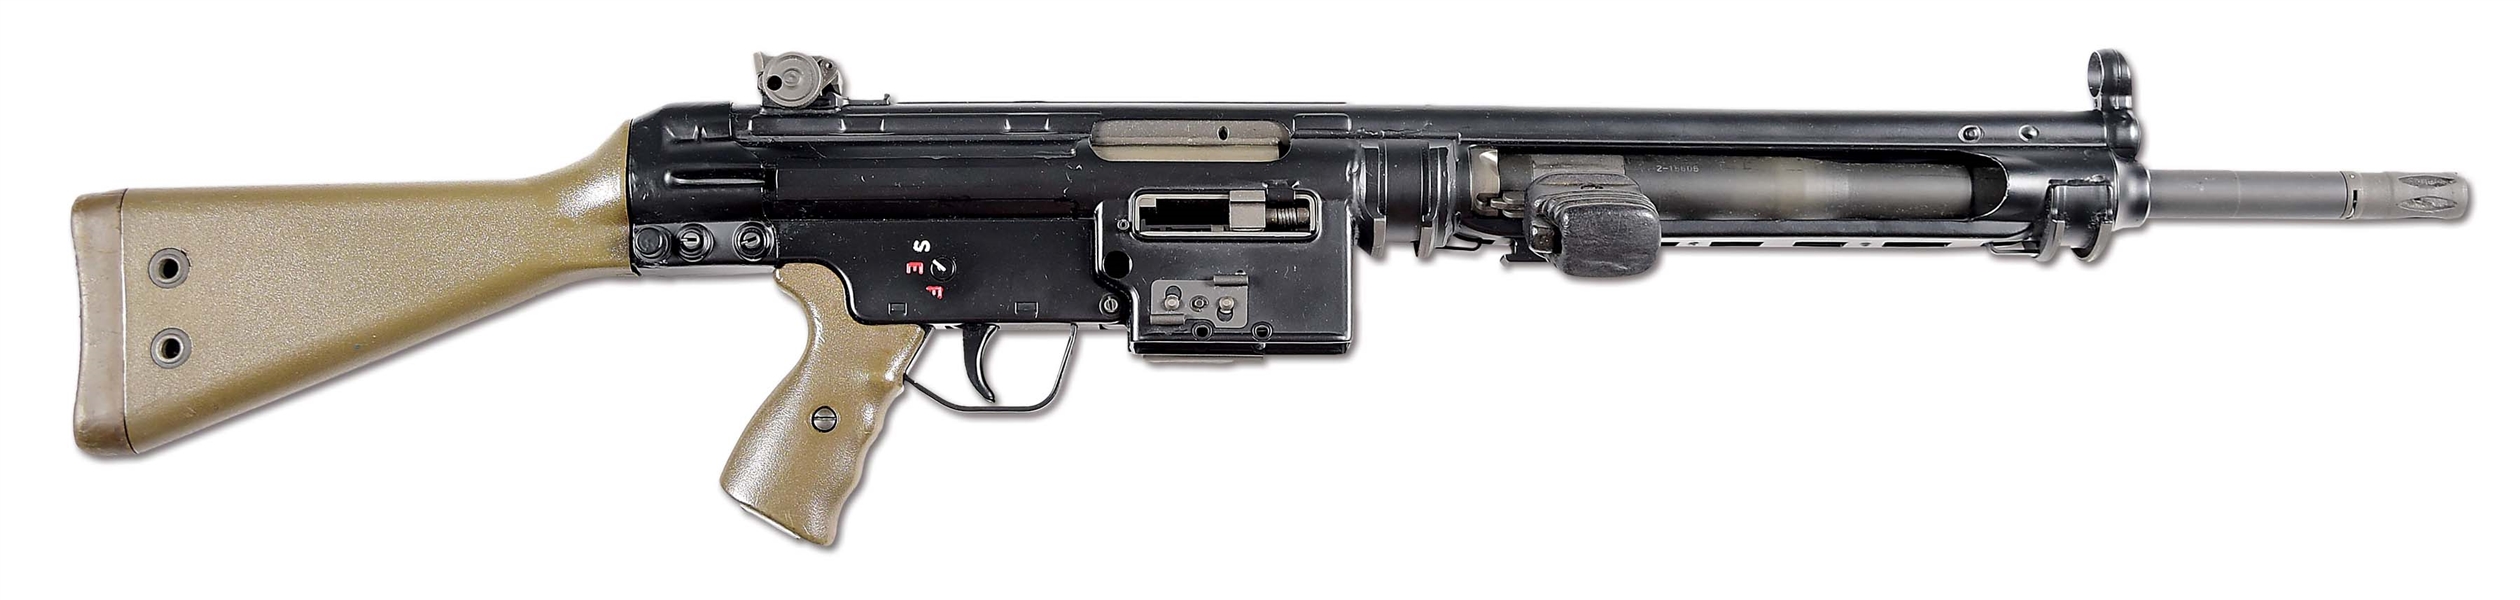 (N) FANTASTIC CONDITION DYER MANUFACTURED HECKLER AND KOCH HK-21 BELT FED MACHINE GUN (FULLY TRANSFERABLE).